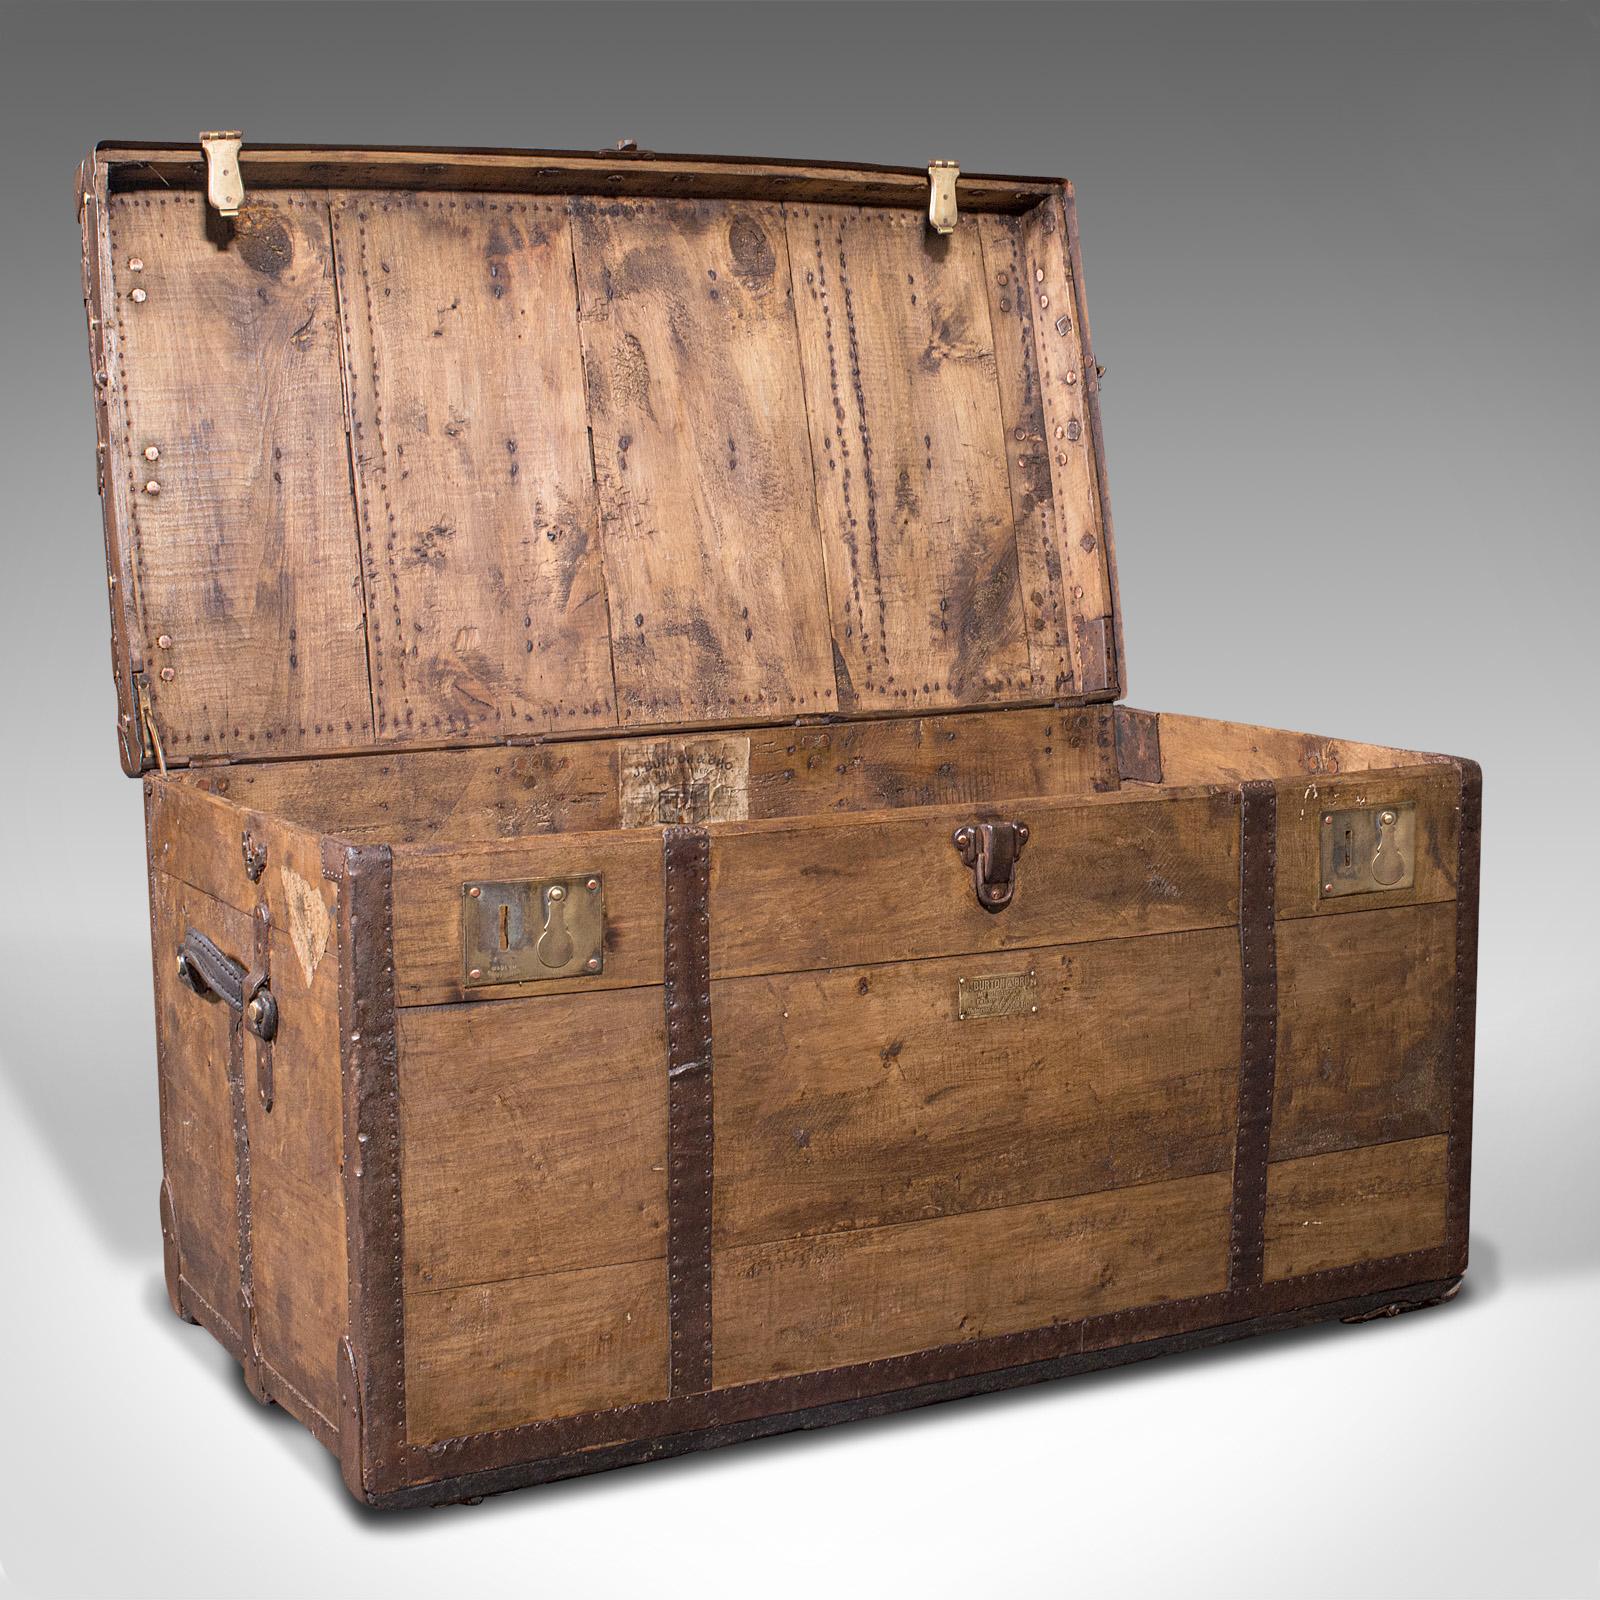 This is a large antique steamer trunk. An English, pine and iron travel or shipping chest, dating to the Victorian period, circa 1900.

Stout of build and antique visual appeal
Displays a desirable aged patina and in good order
Pine stocks show